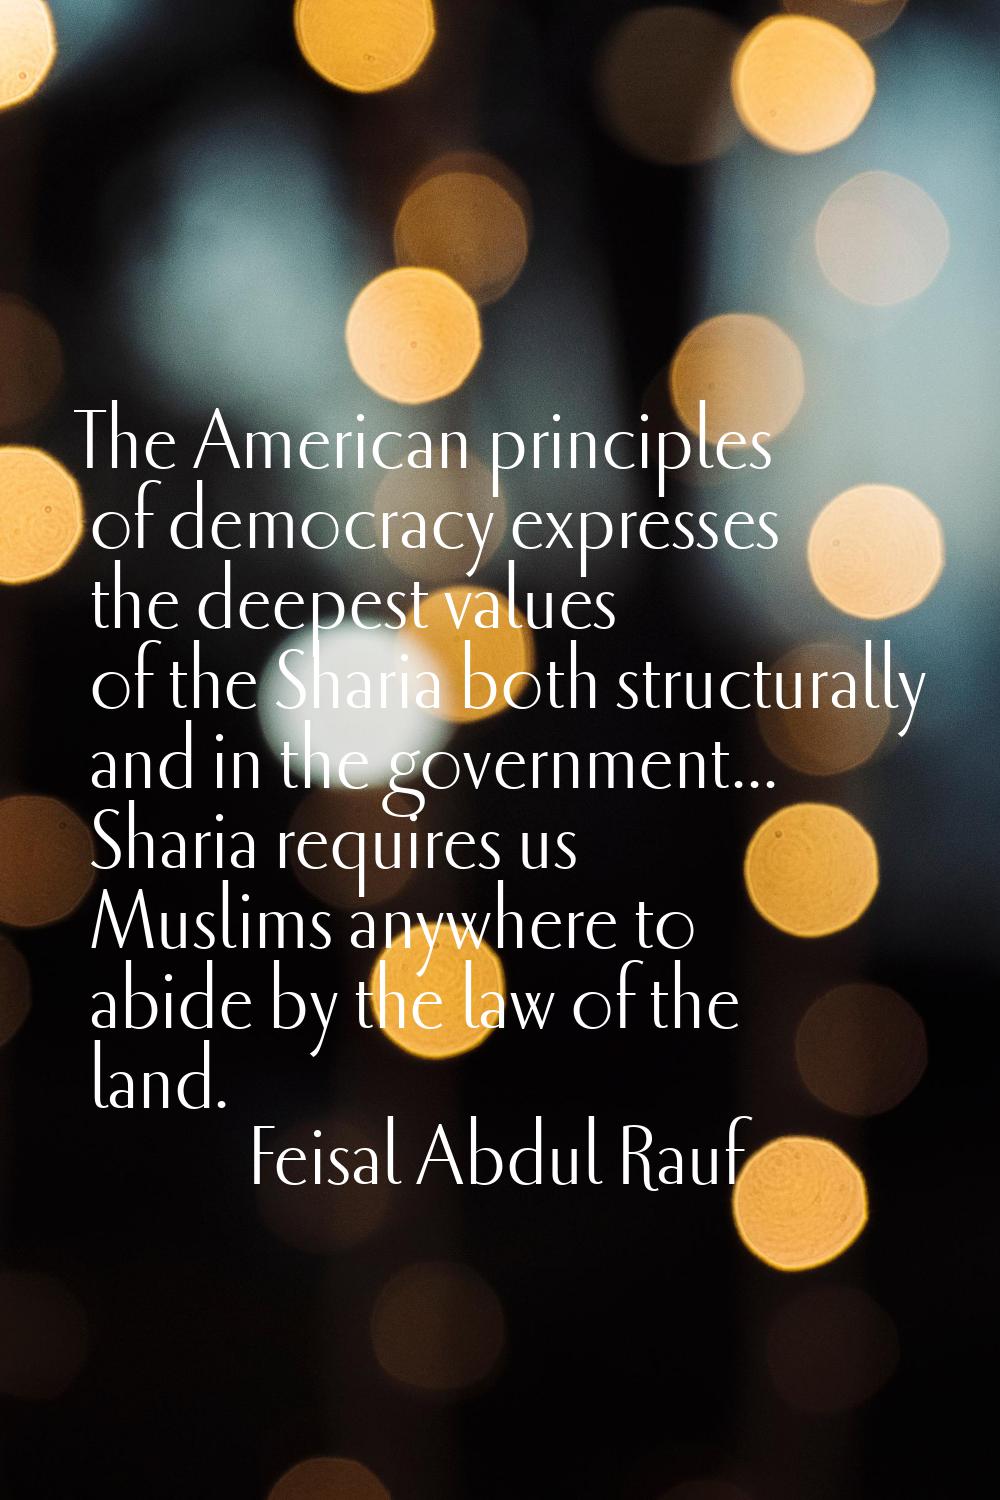 The American principles of democracy expresses the deepest values of the Sharia both structurally a